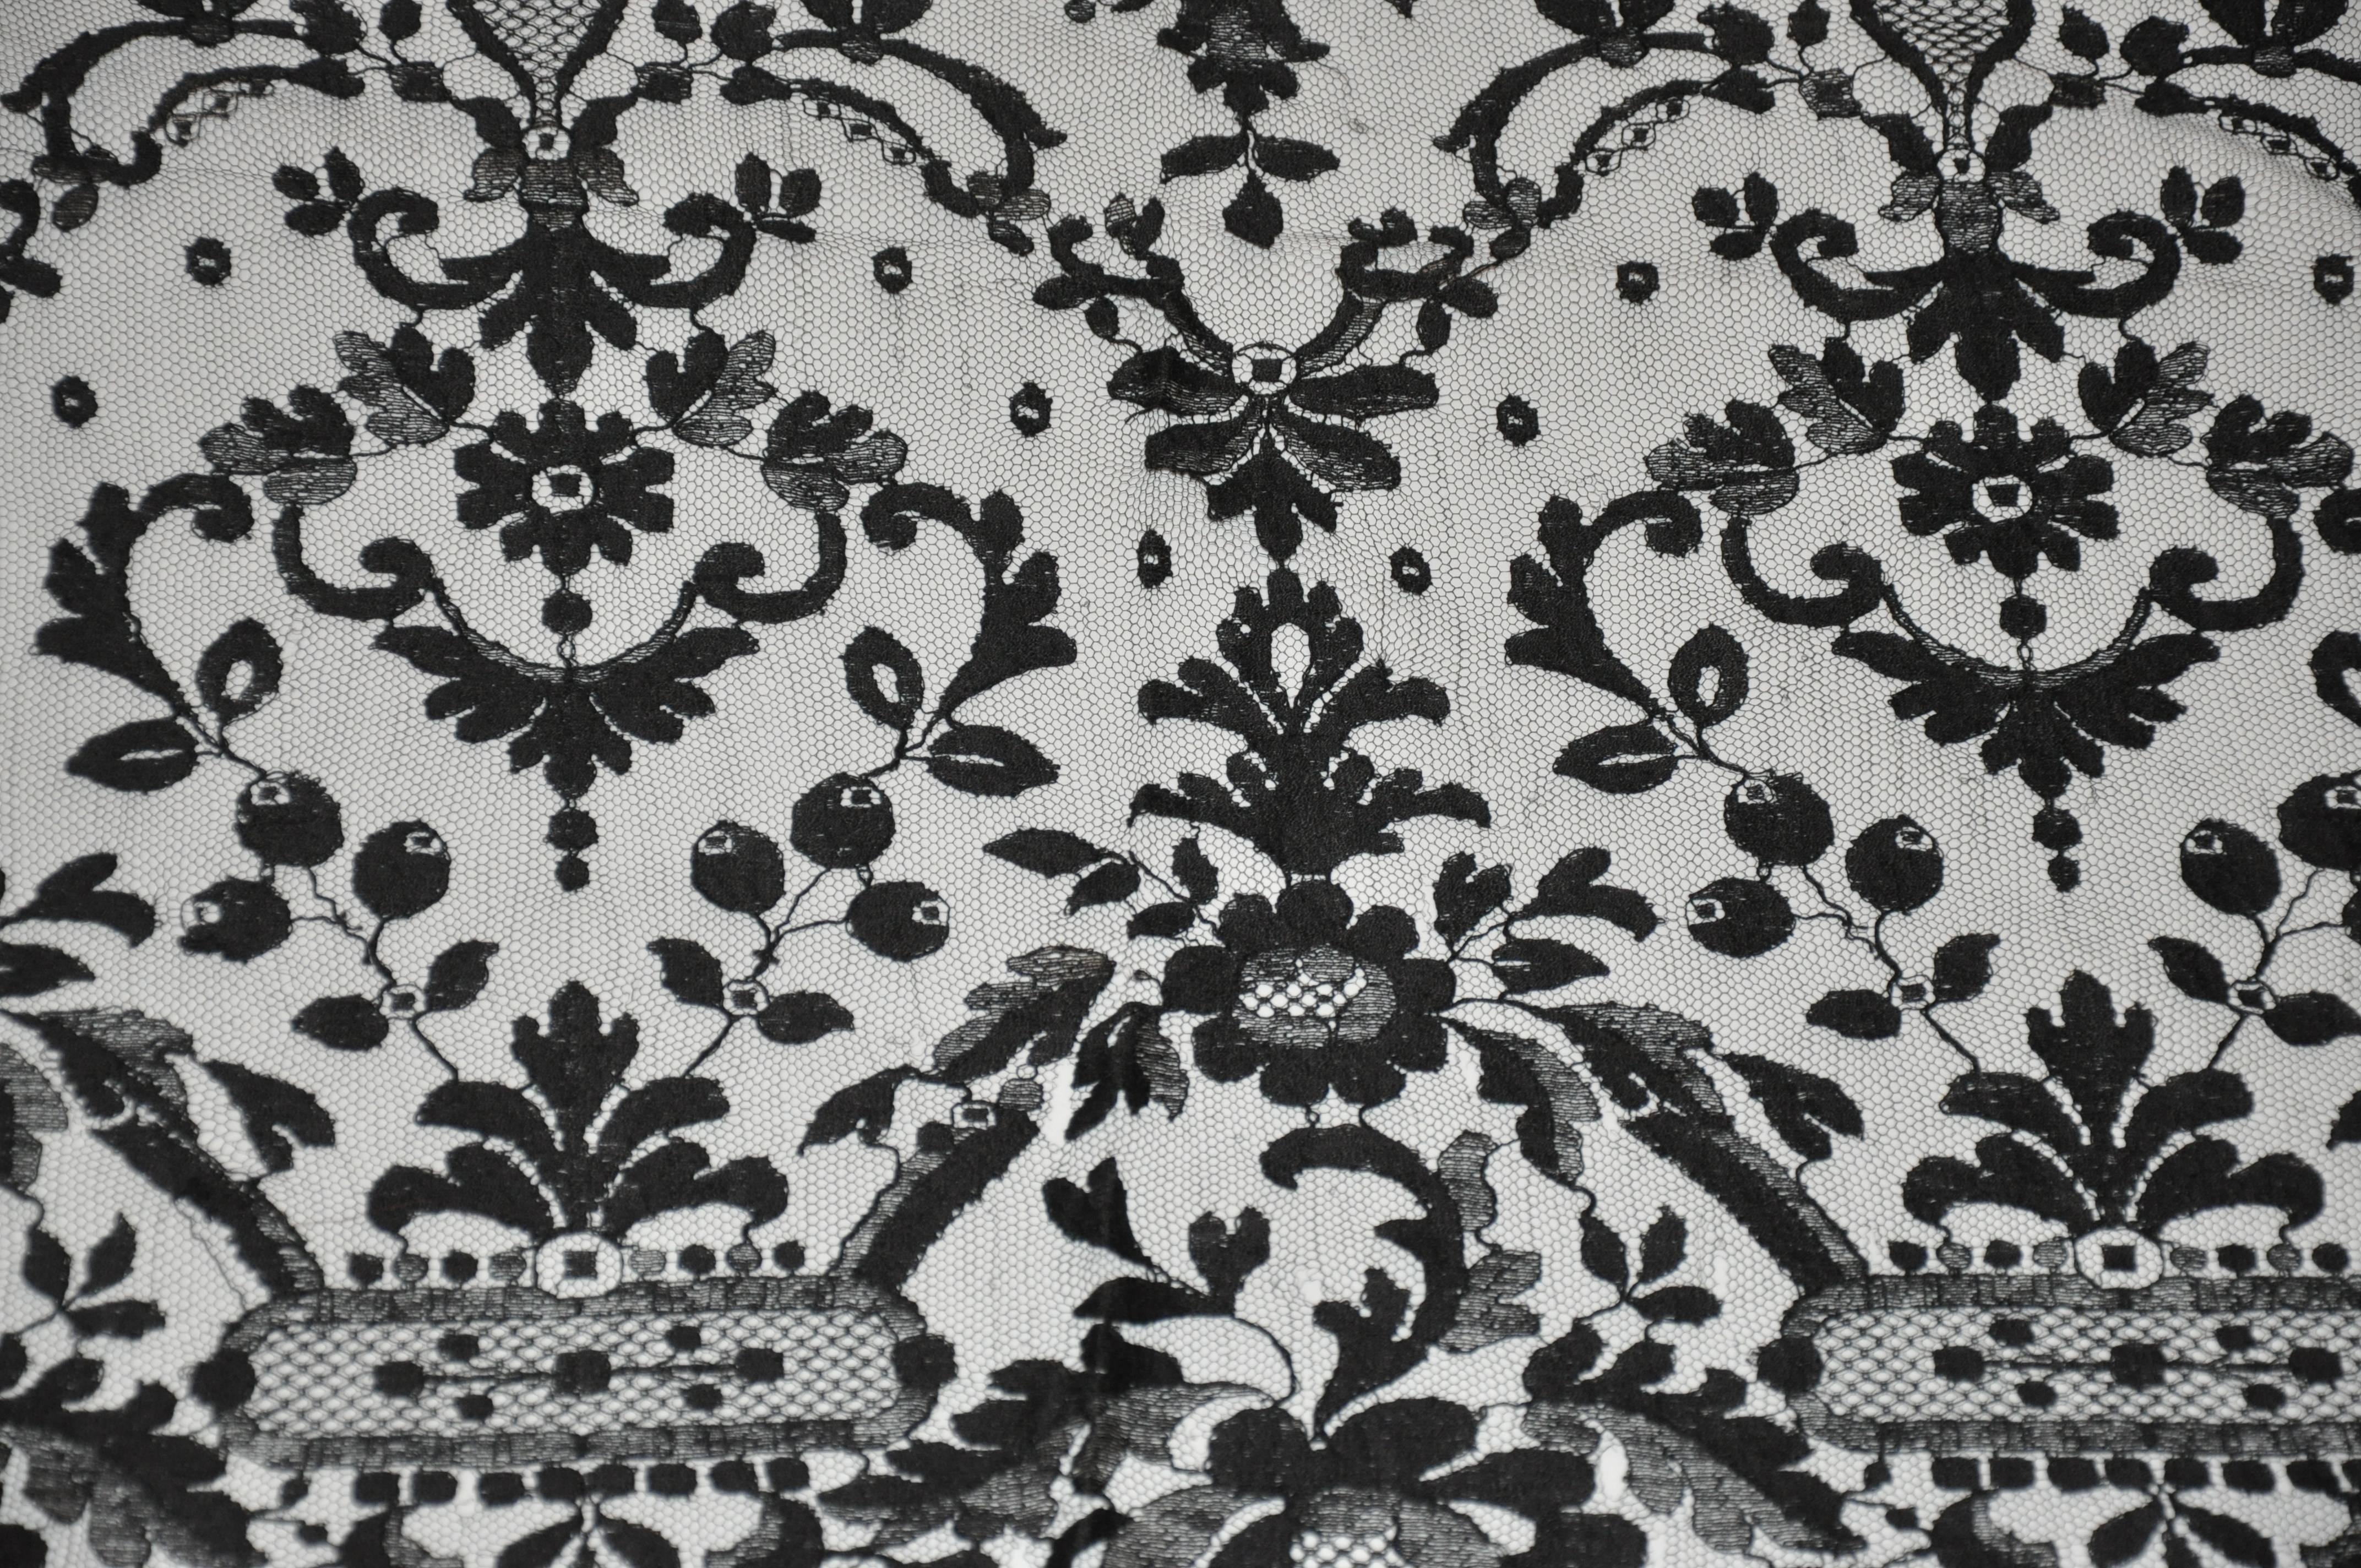 Rare huge black floral lace with netting accent "Widow Shawl" measures 30" x 77". Condition if fair, from France.